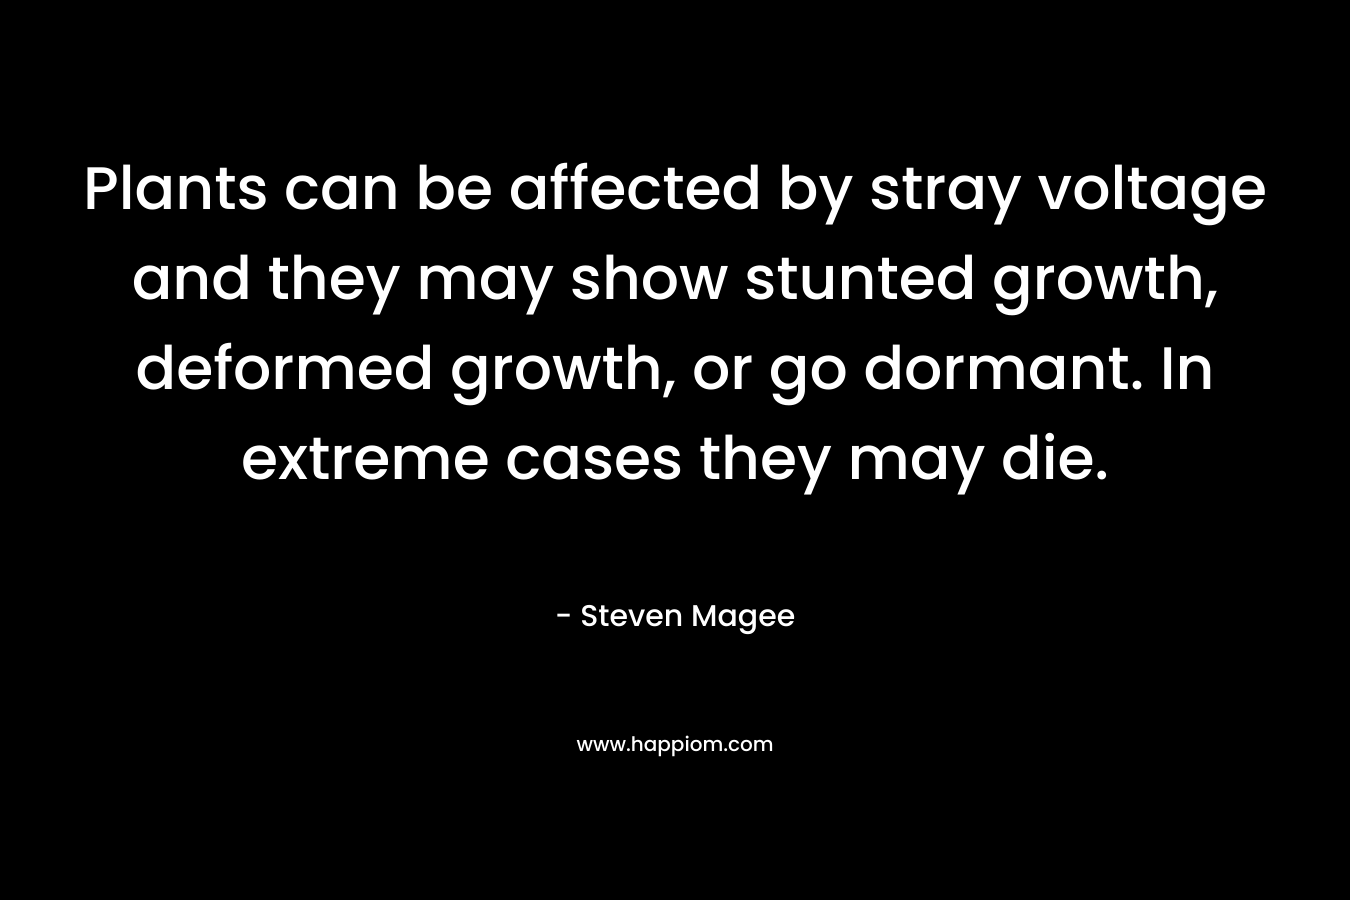 Plants can be affected by stray voltage and they may show stunted growth, deformed growth, or go dormant. In extreme cases they may die. – Steven Magee